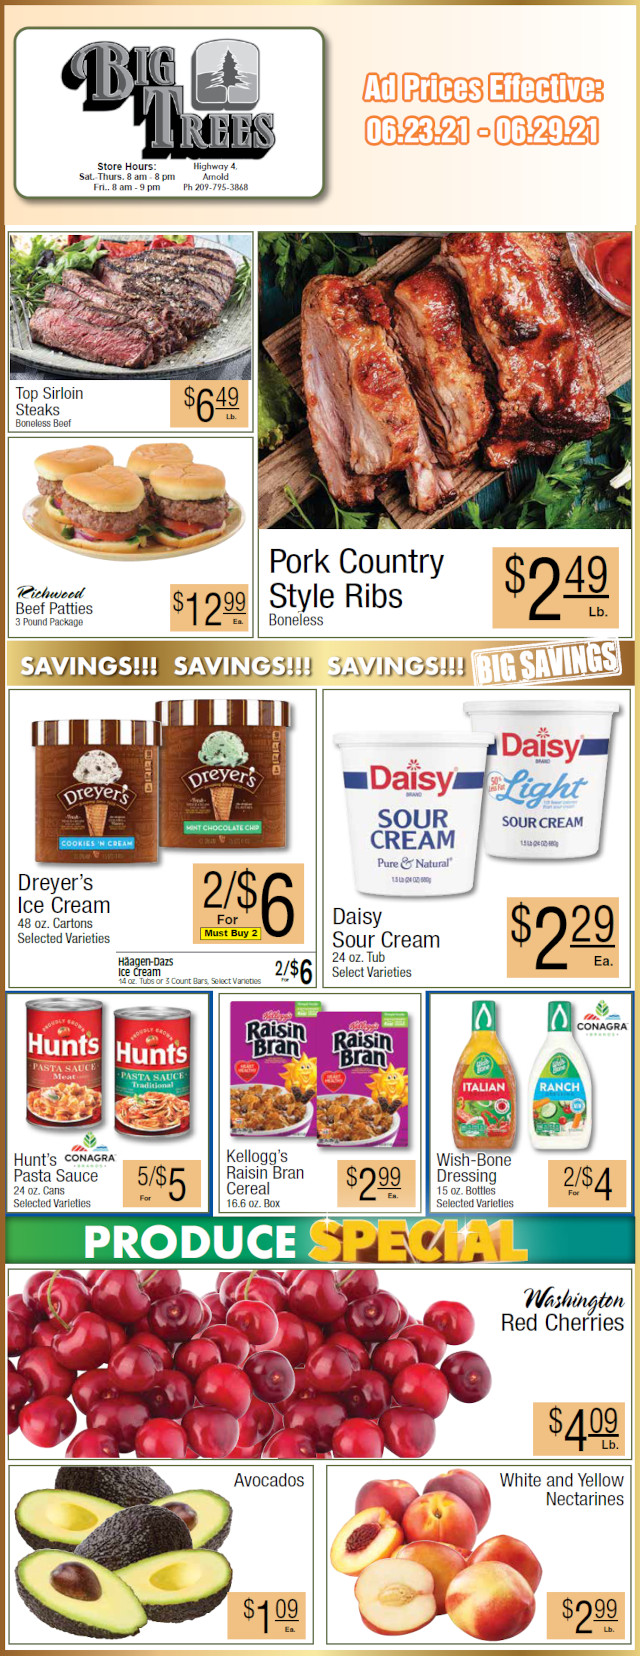 Big Trees Market Weekly Ad & Grocery Specials Through June 29th! Shop Local & Save!!